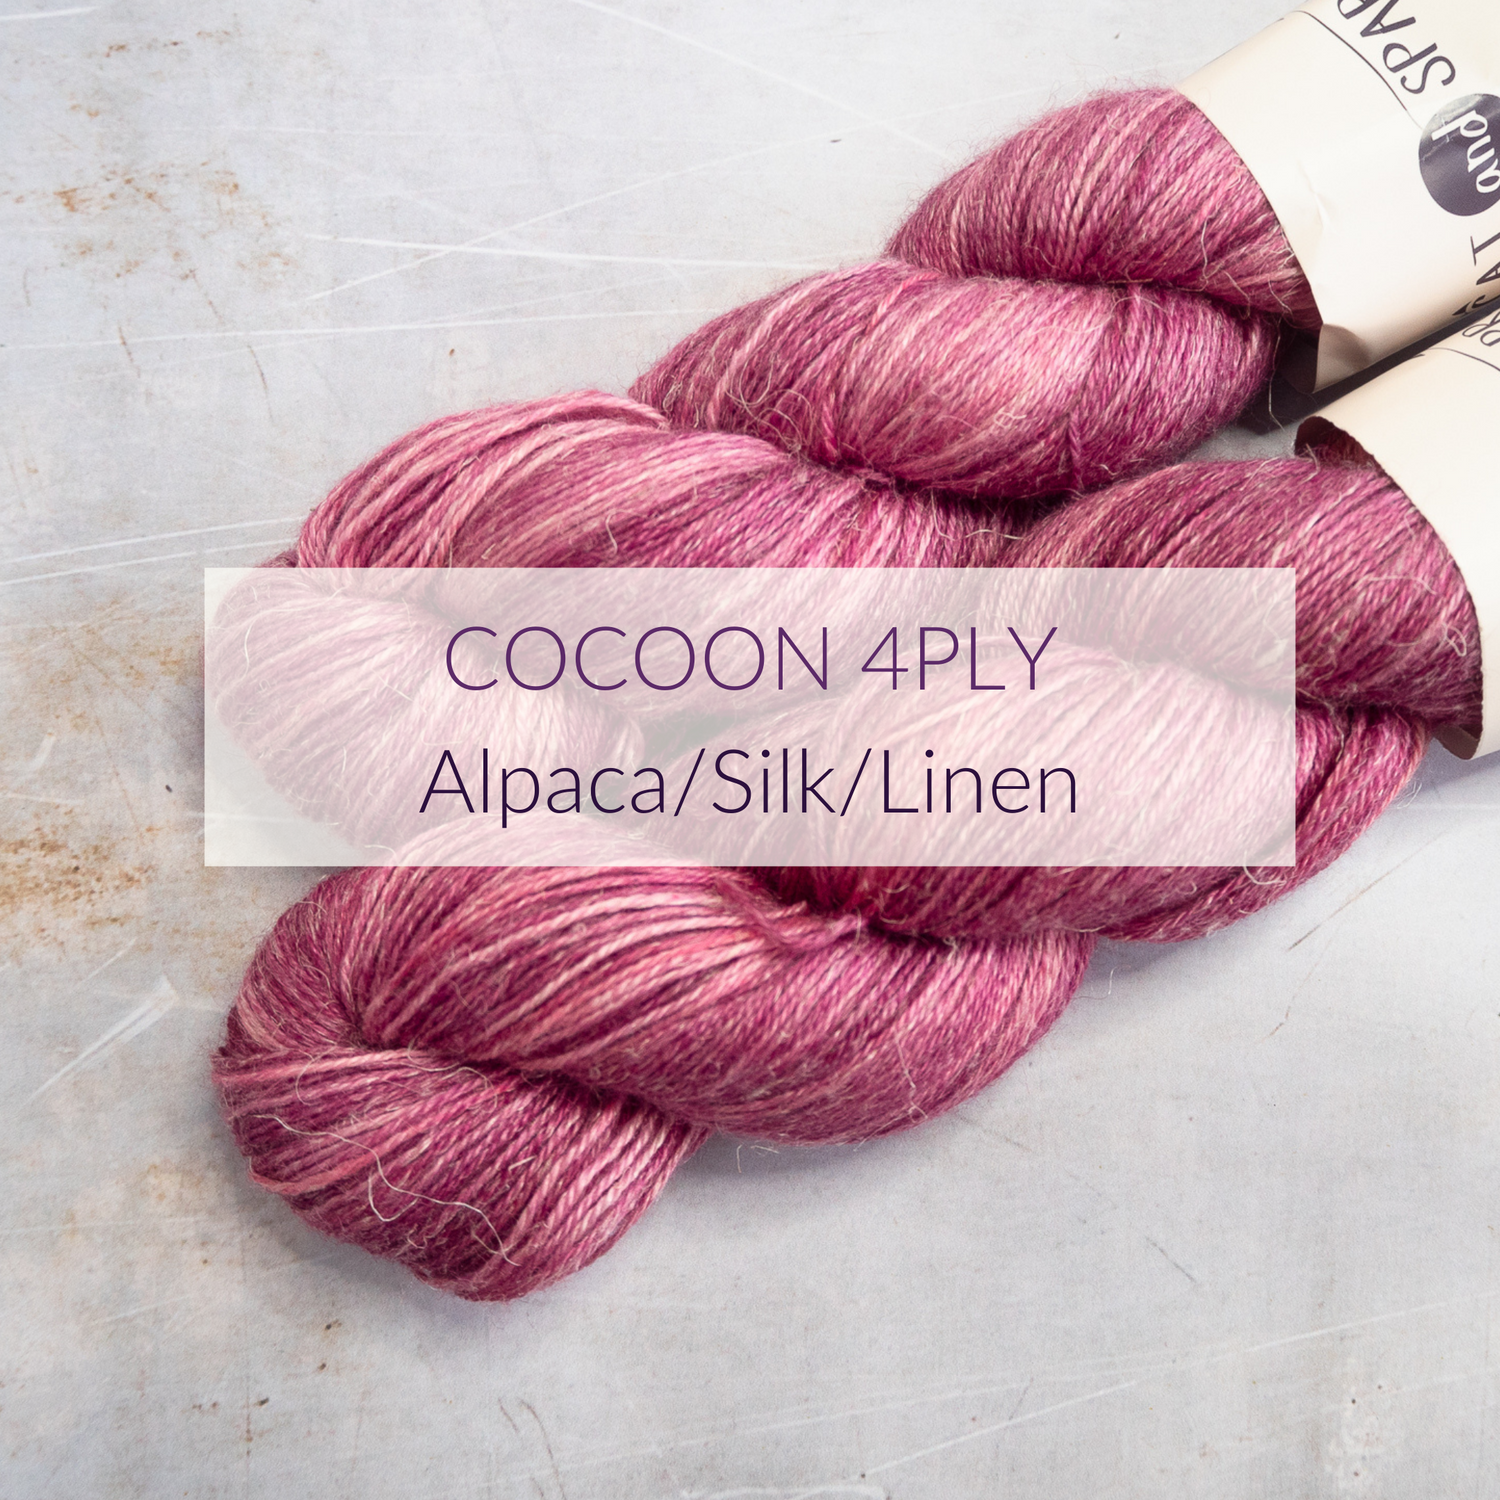 Cocoon 4ply